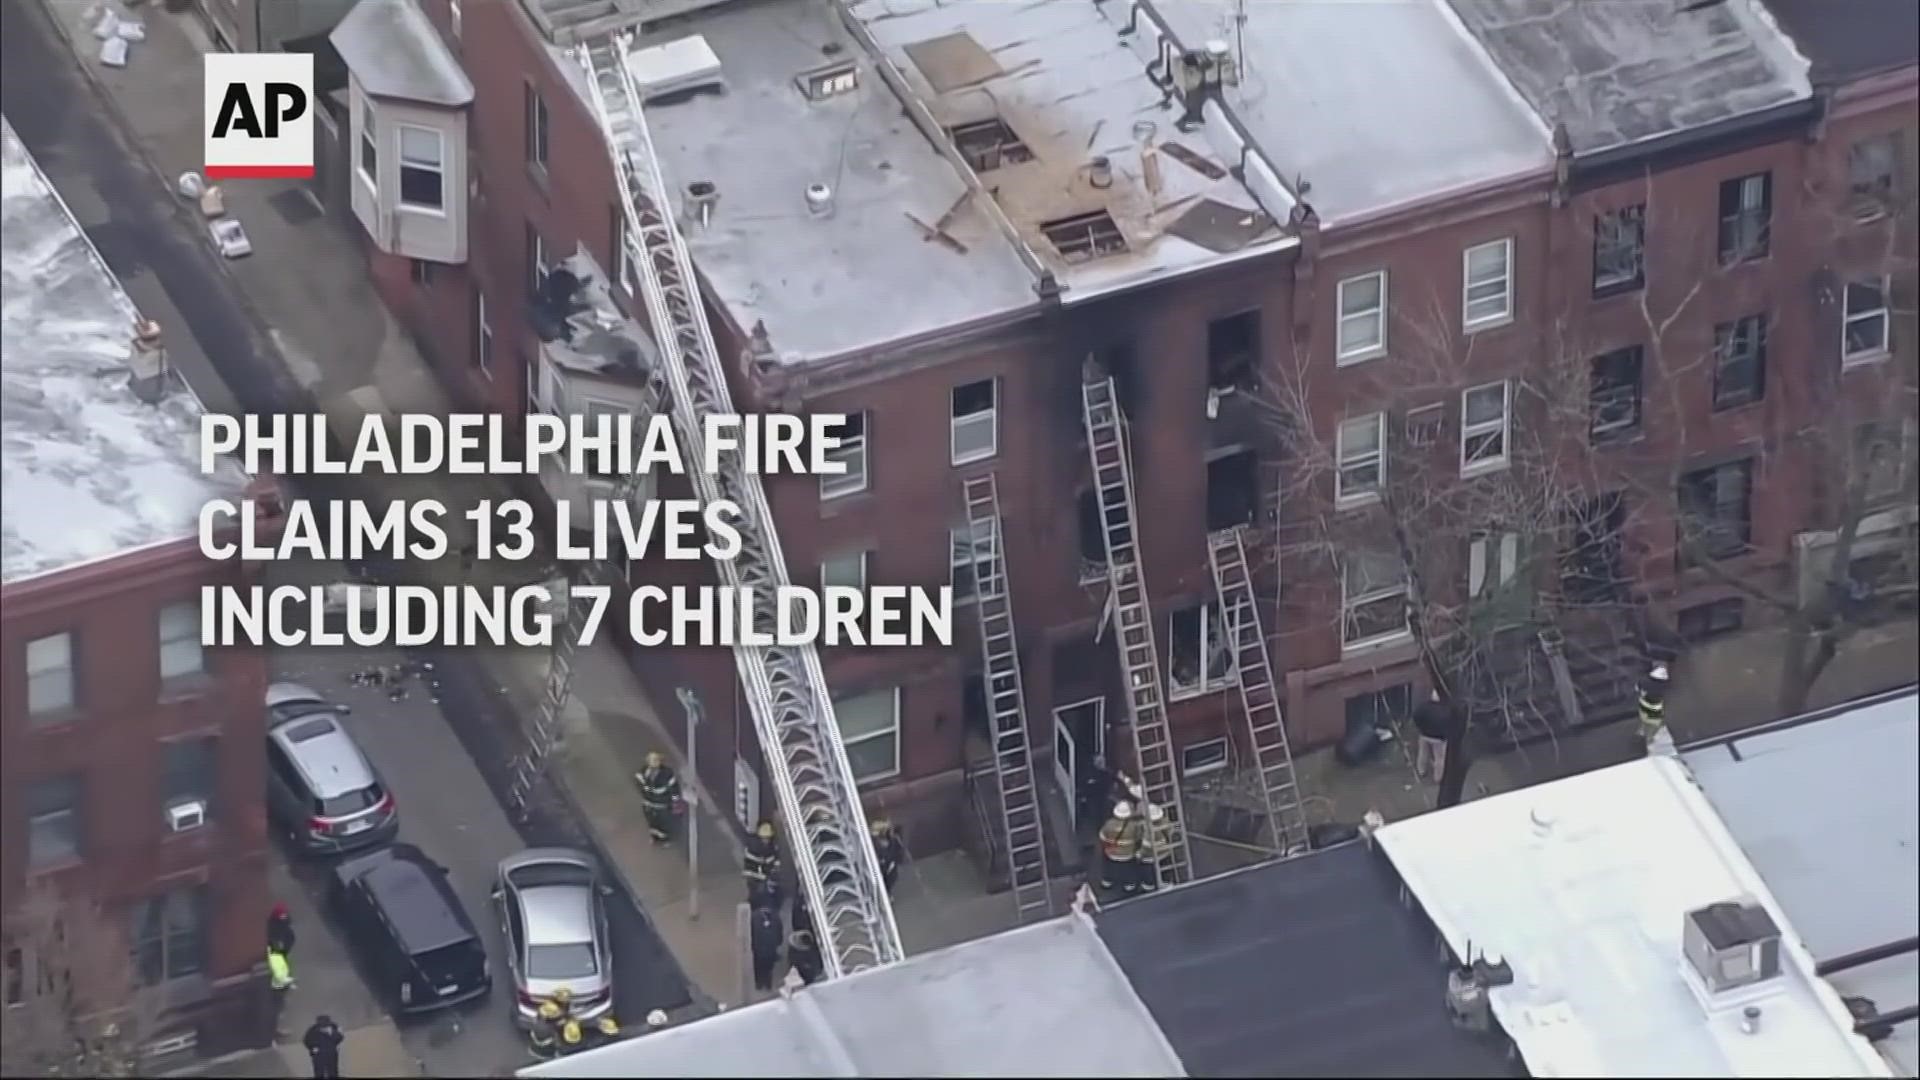 Officials said at a news conference that there were four smoke detectors in the Philadelphia building but that none were operating.